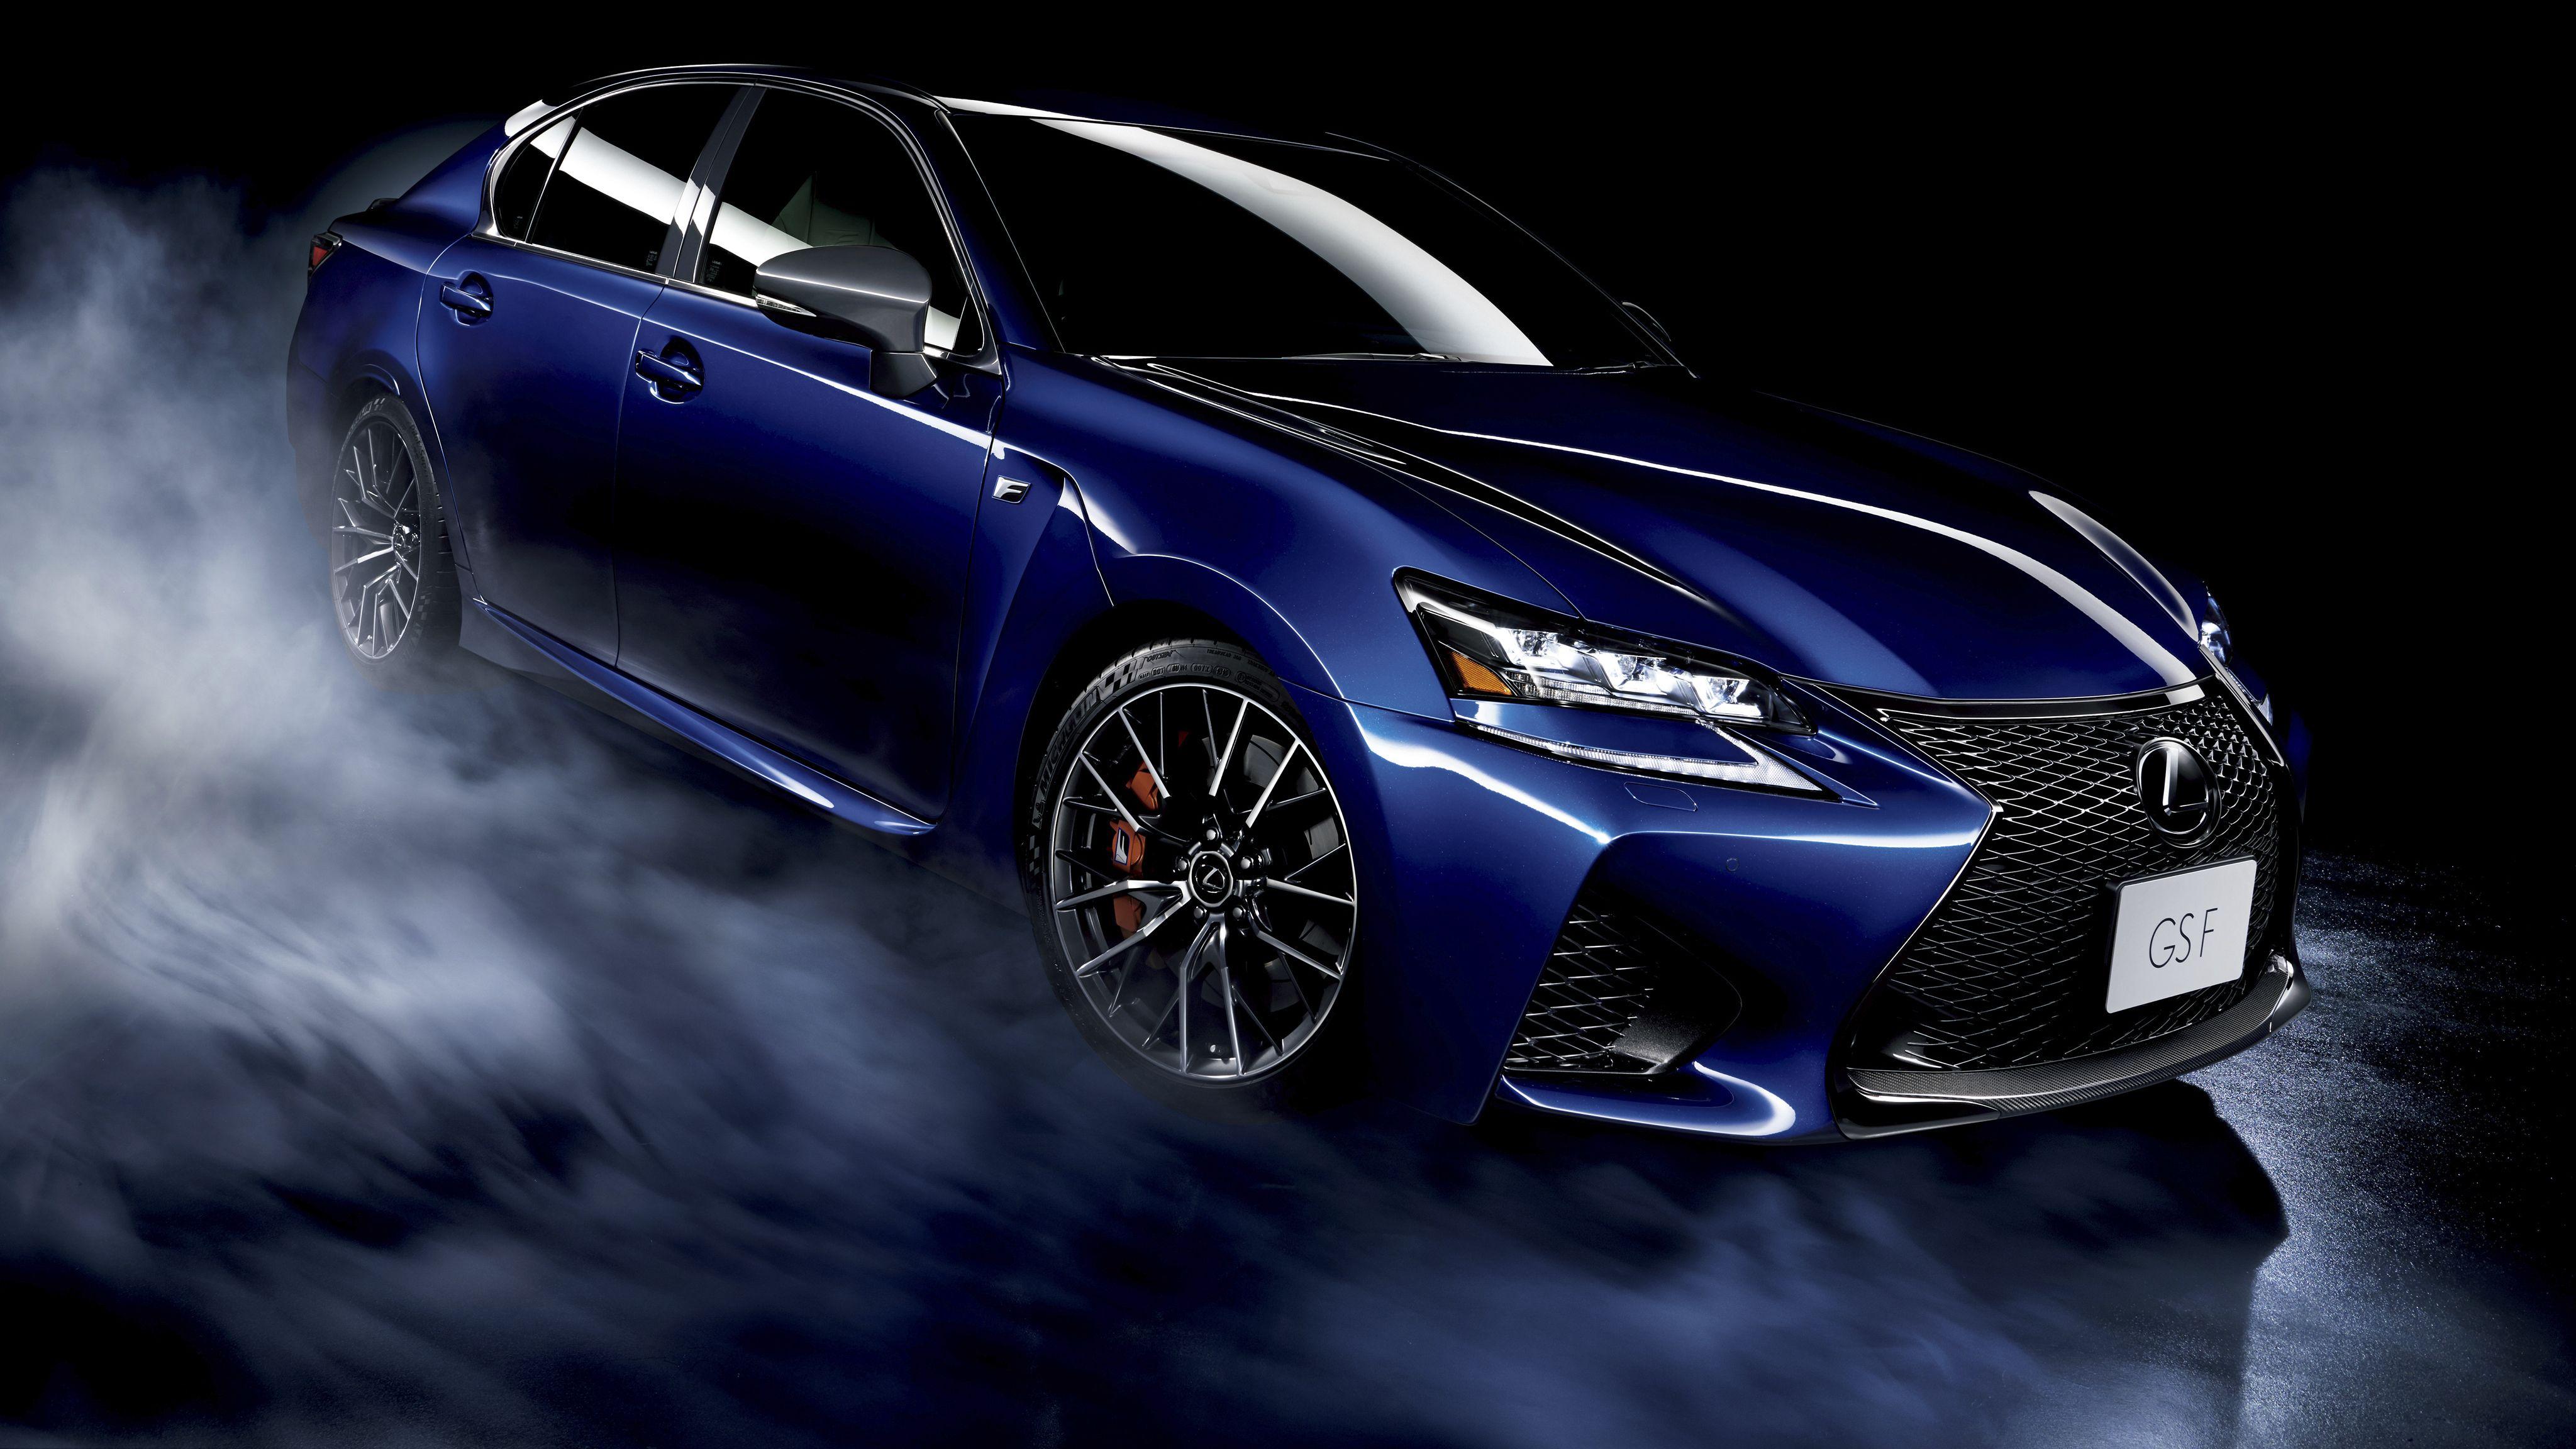 Download Lexus wallpapers for mobile phone free Lexus HD pictures